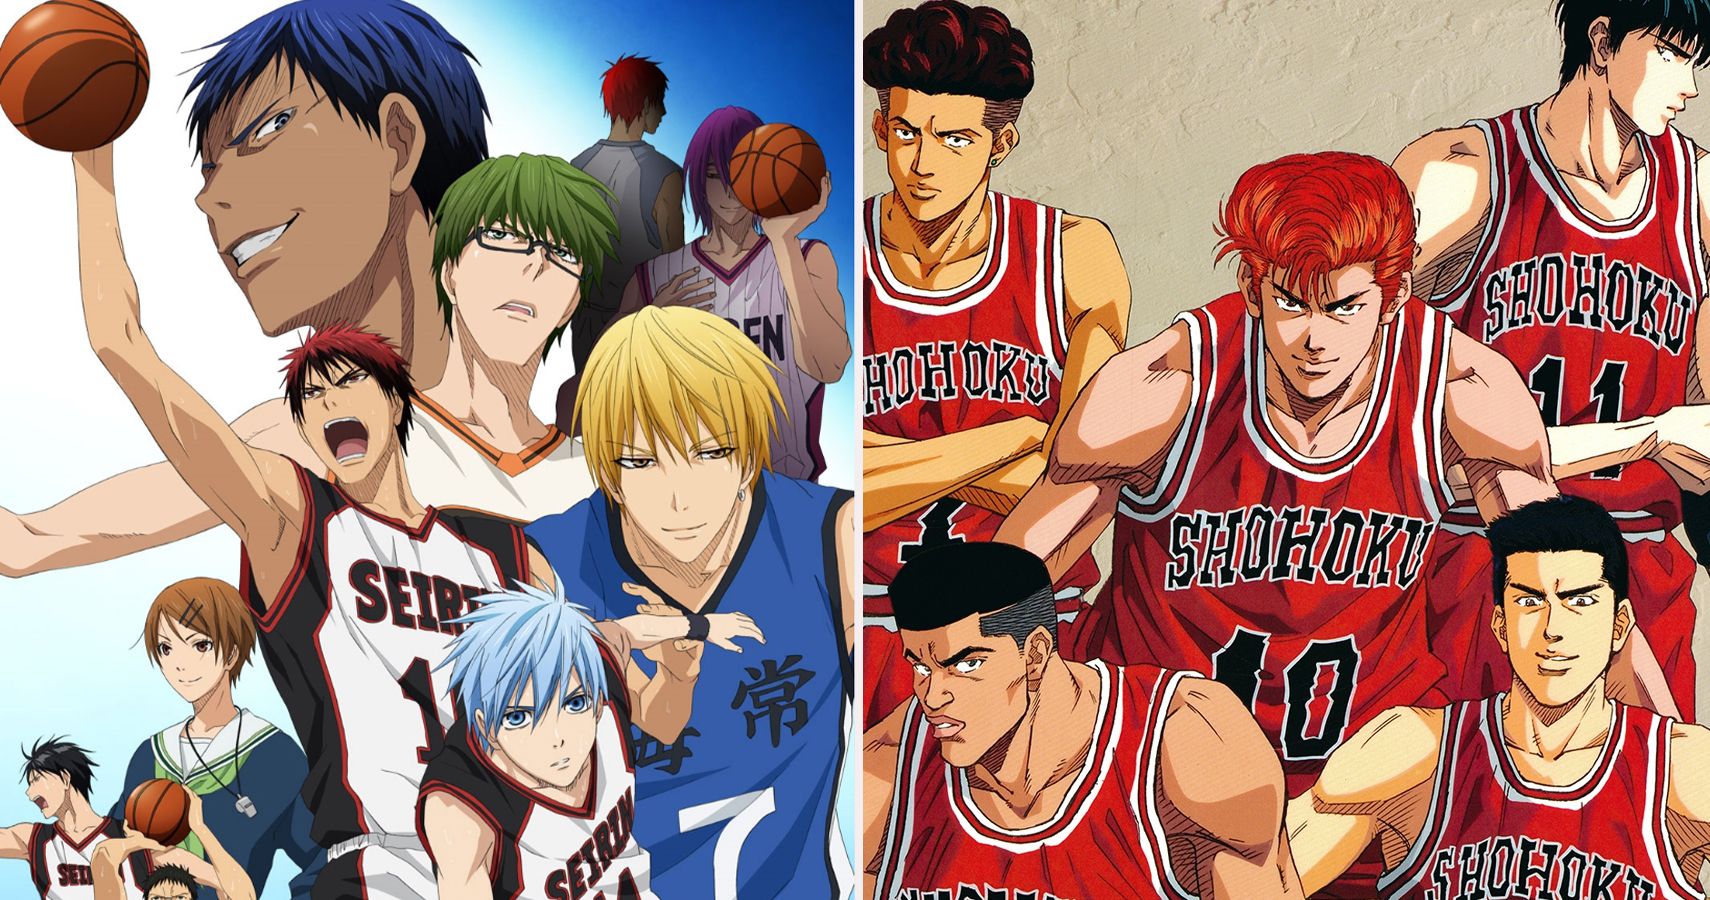 Five Sports Anime All About Totally Made-Up Sports